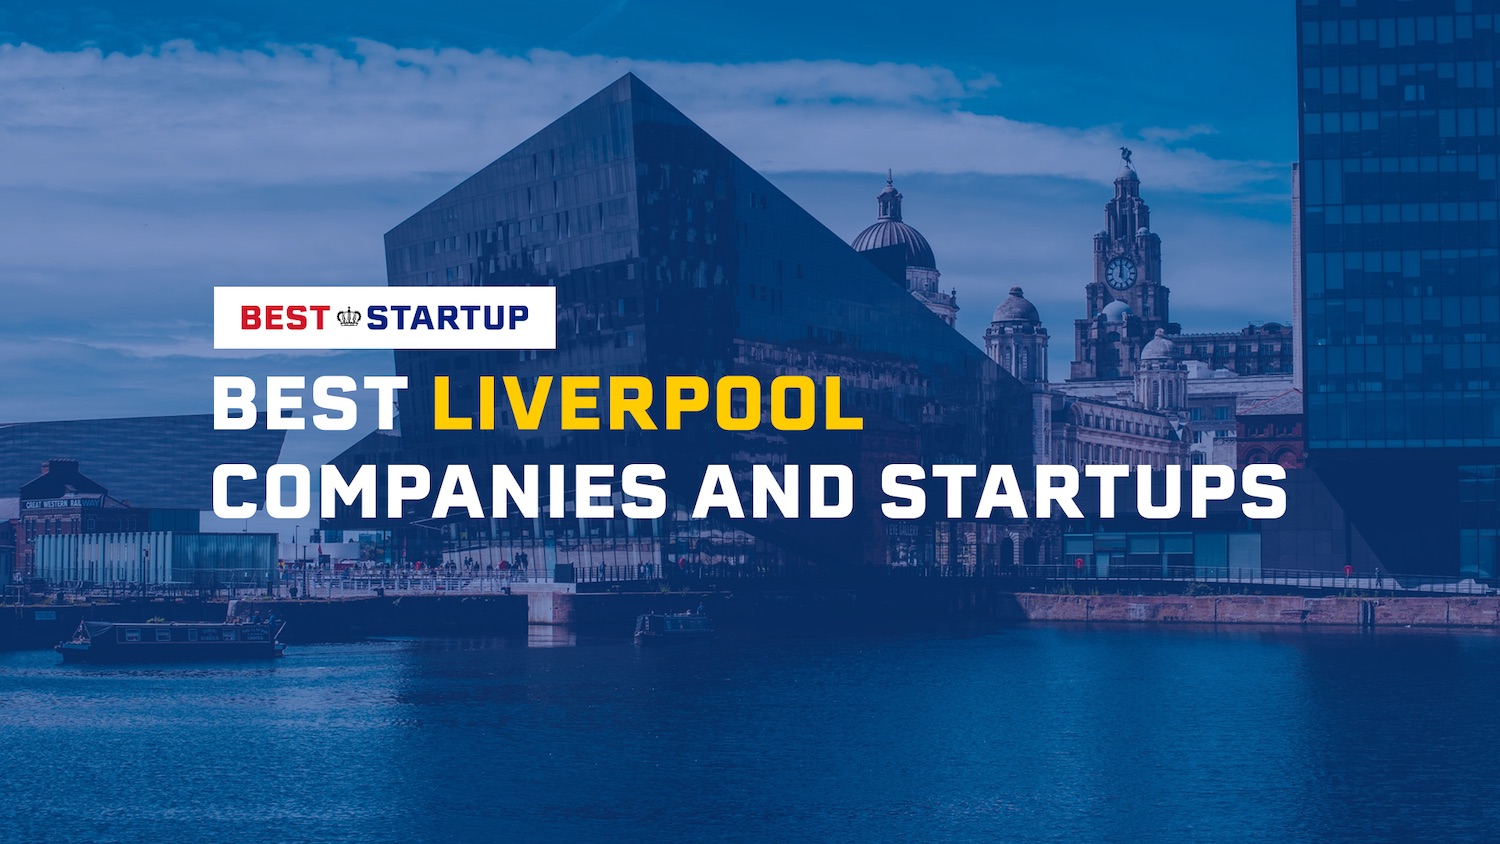 Announced! TCW has been featured in The Best Startup UK’s annual Top Liverpool based software firms.